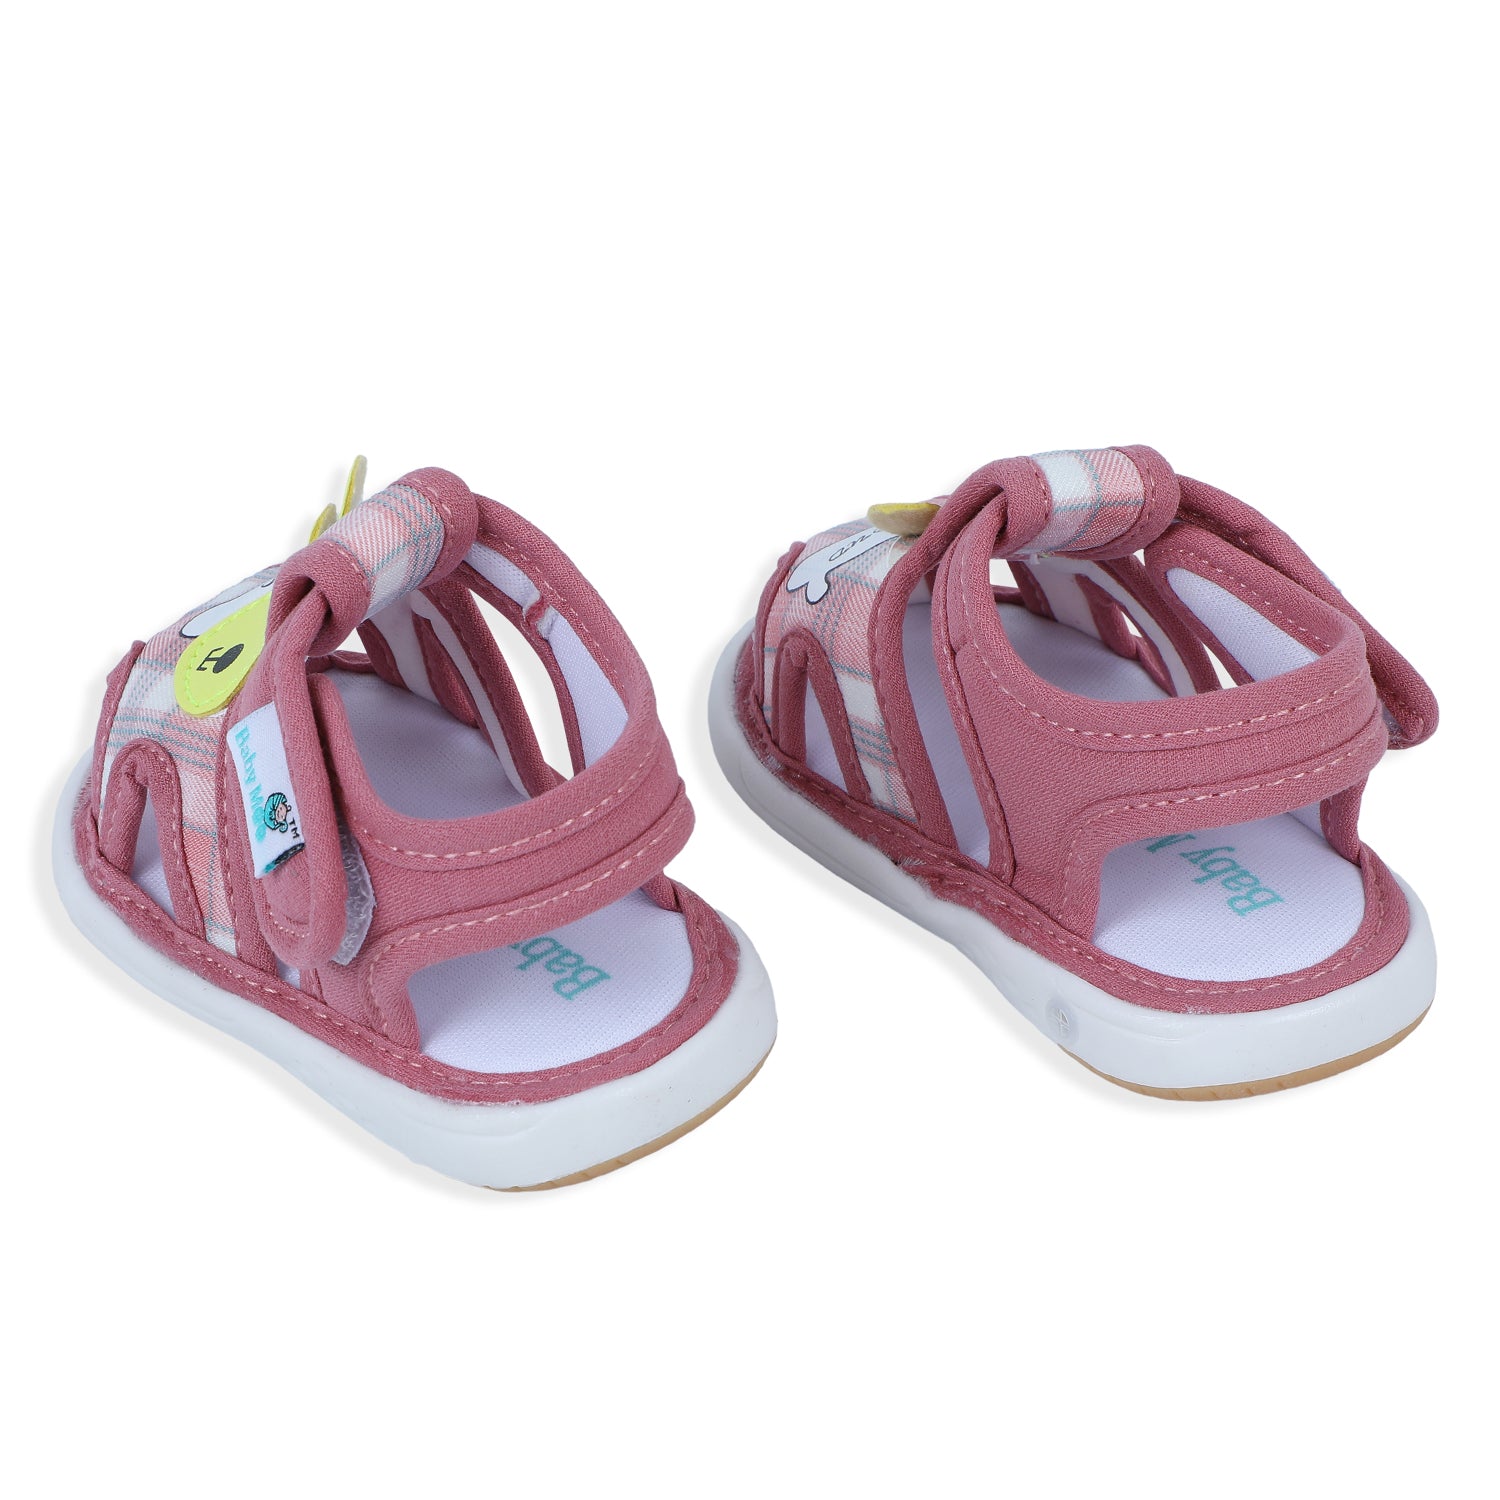 Baby Moo Cute Puppy Checked Chu-Chu Sound Breathable Anti-Skid Sandals - Pink - Baby Moo